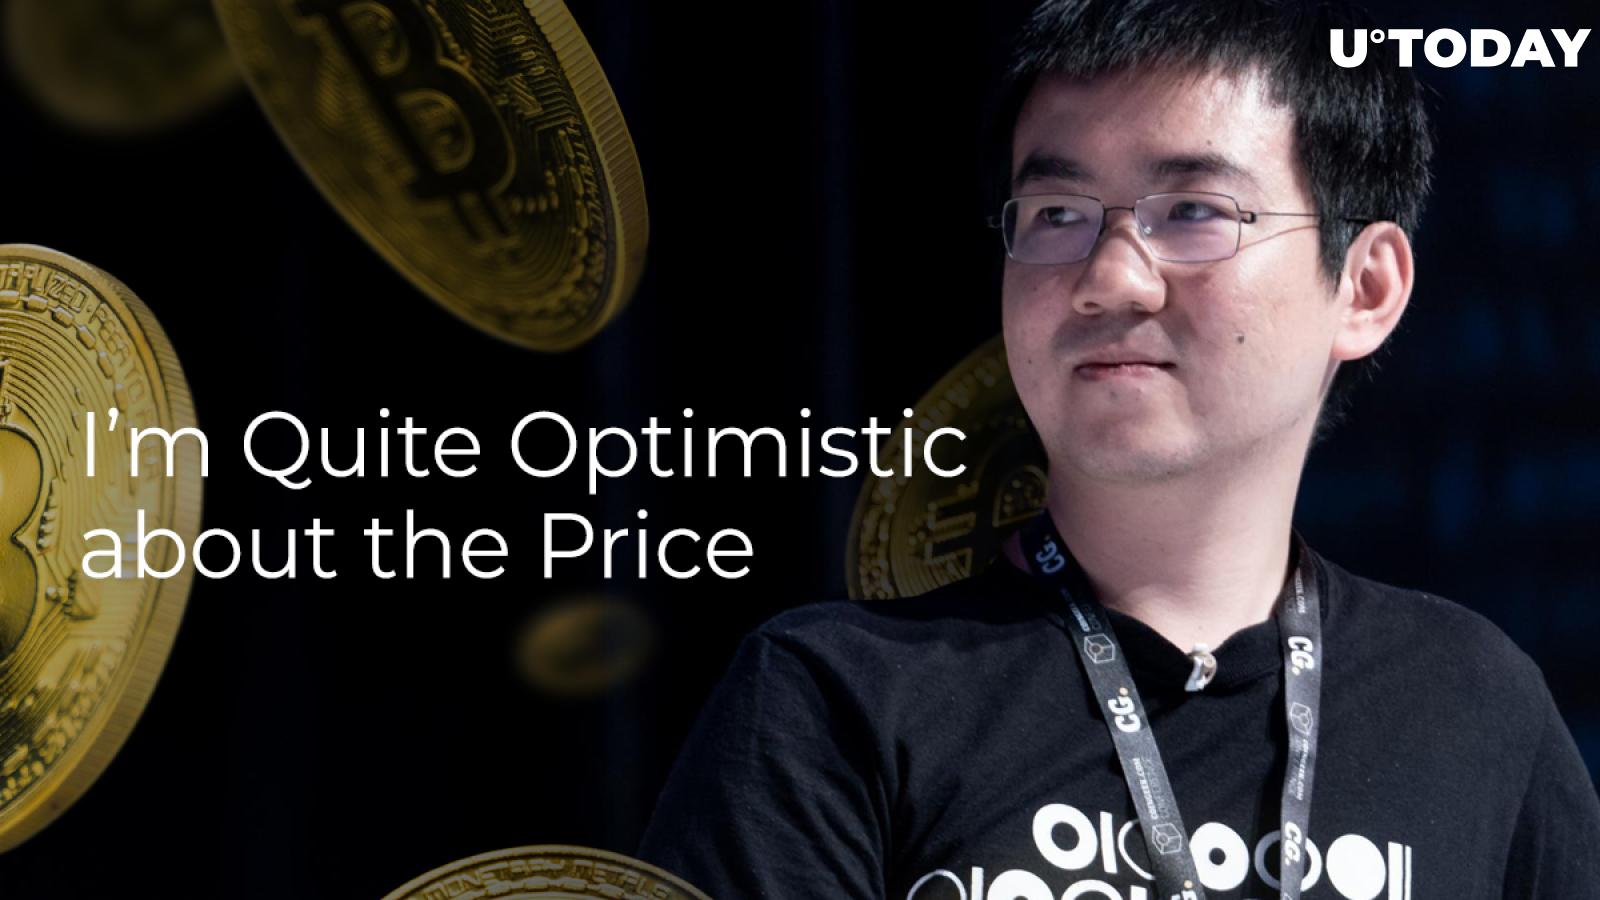 Bitmain Co-Founder Jihan Wu on Bitcoin and Crypto: ‘I’m Quite Optimistic about the Price’